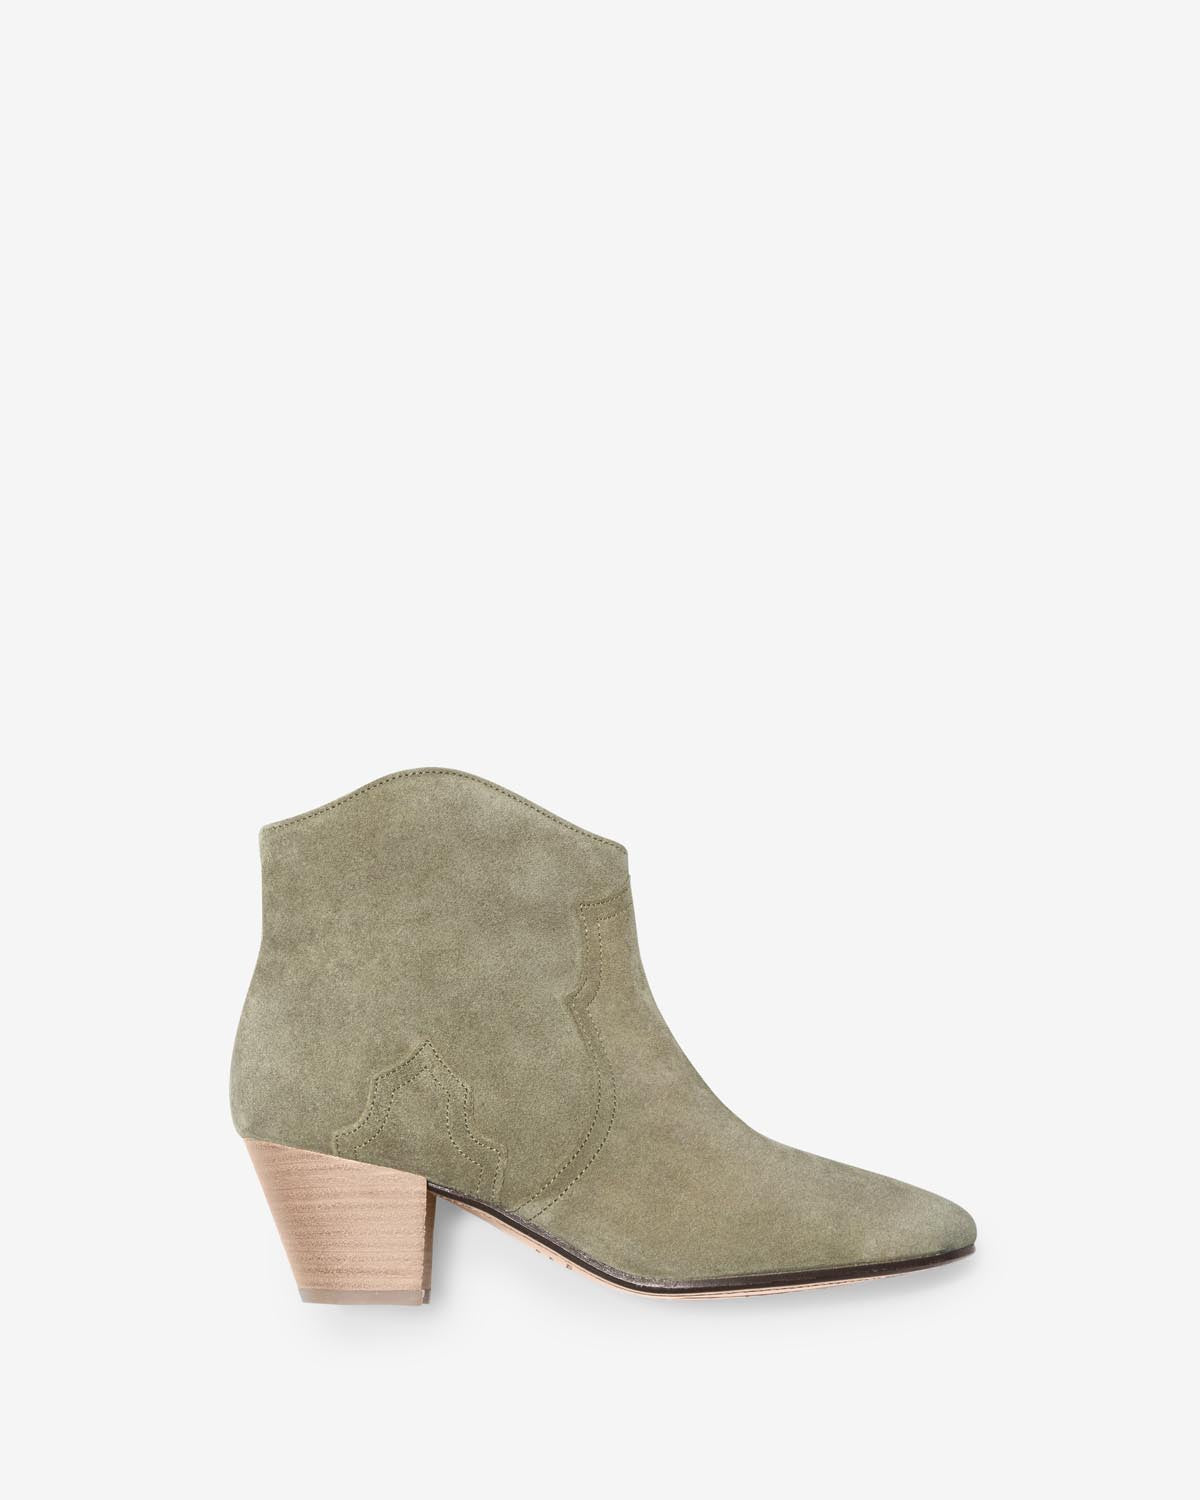 Boots dicker Woman Taupe 1